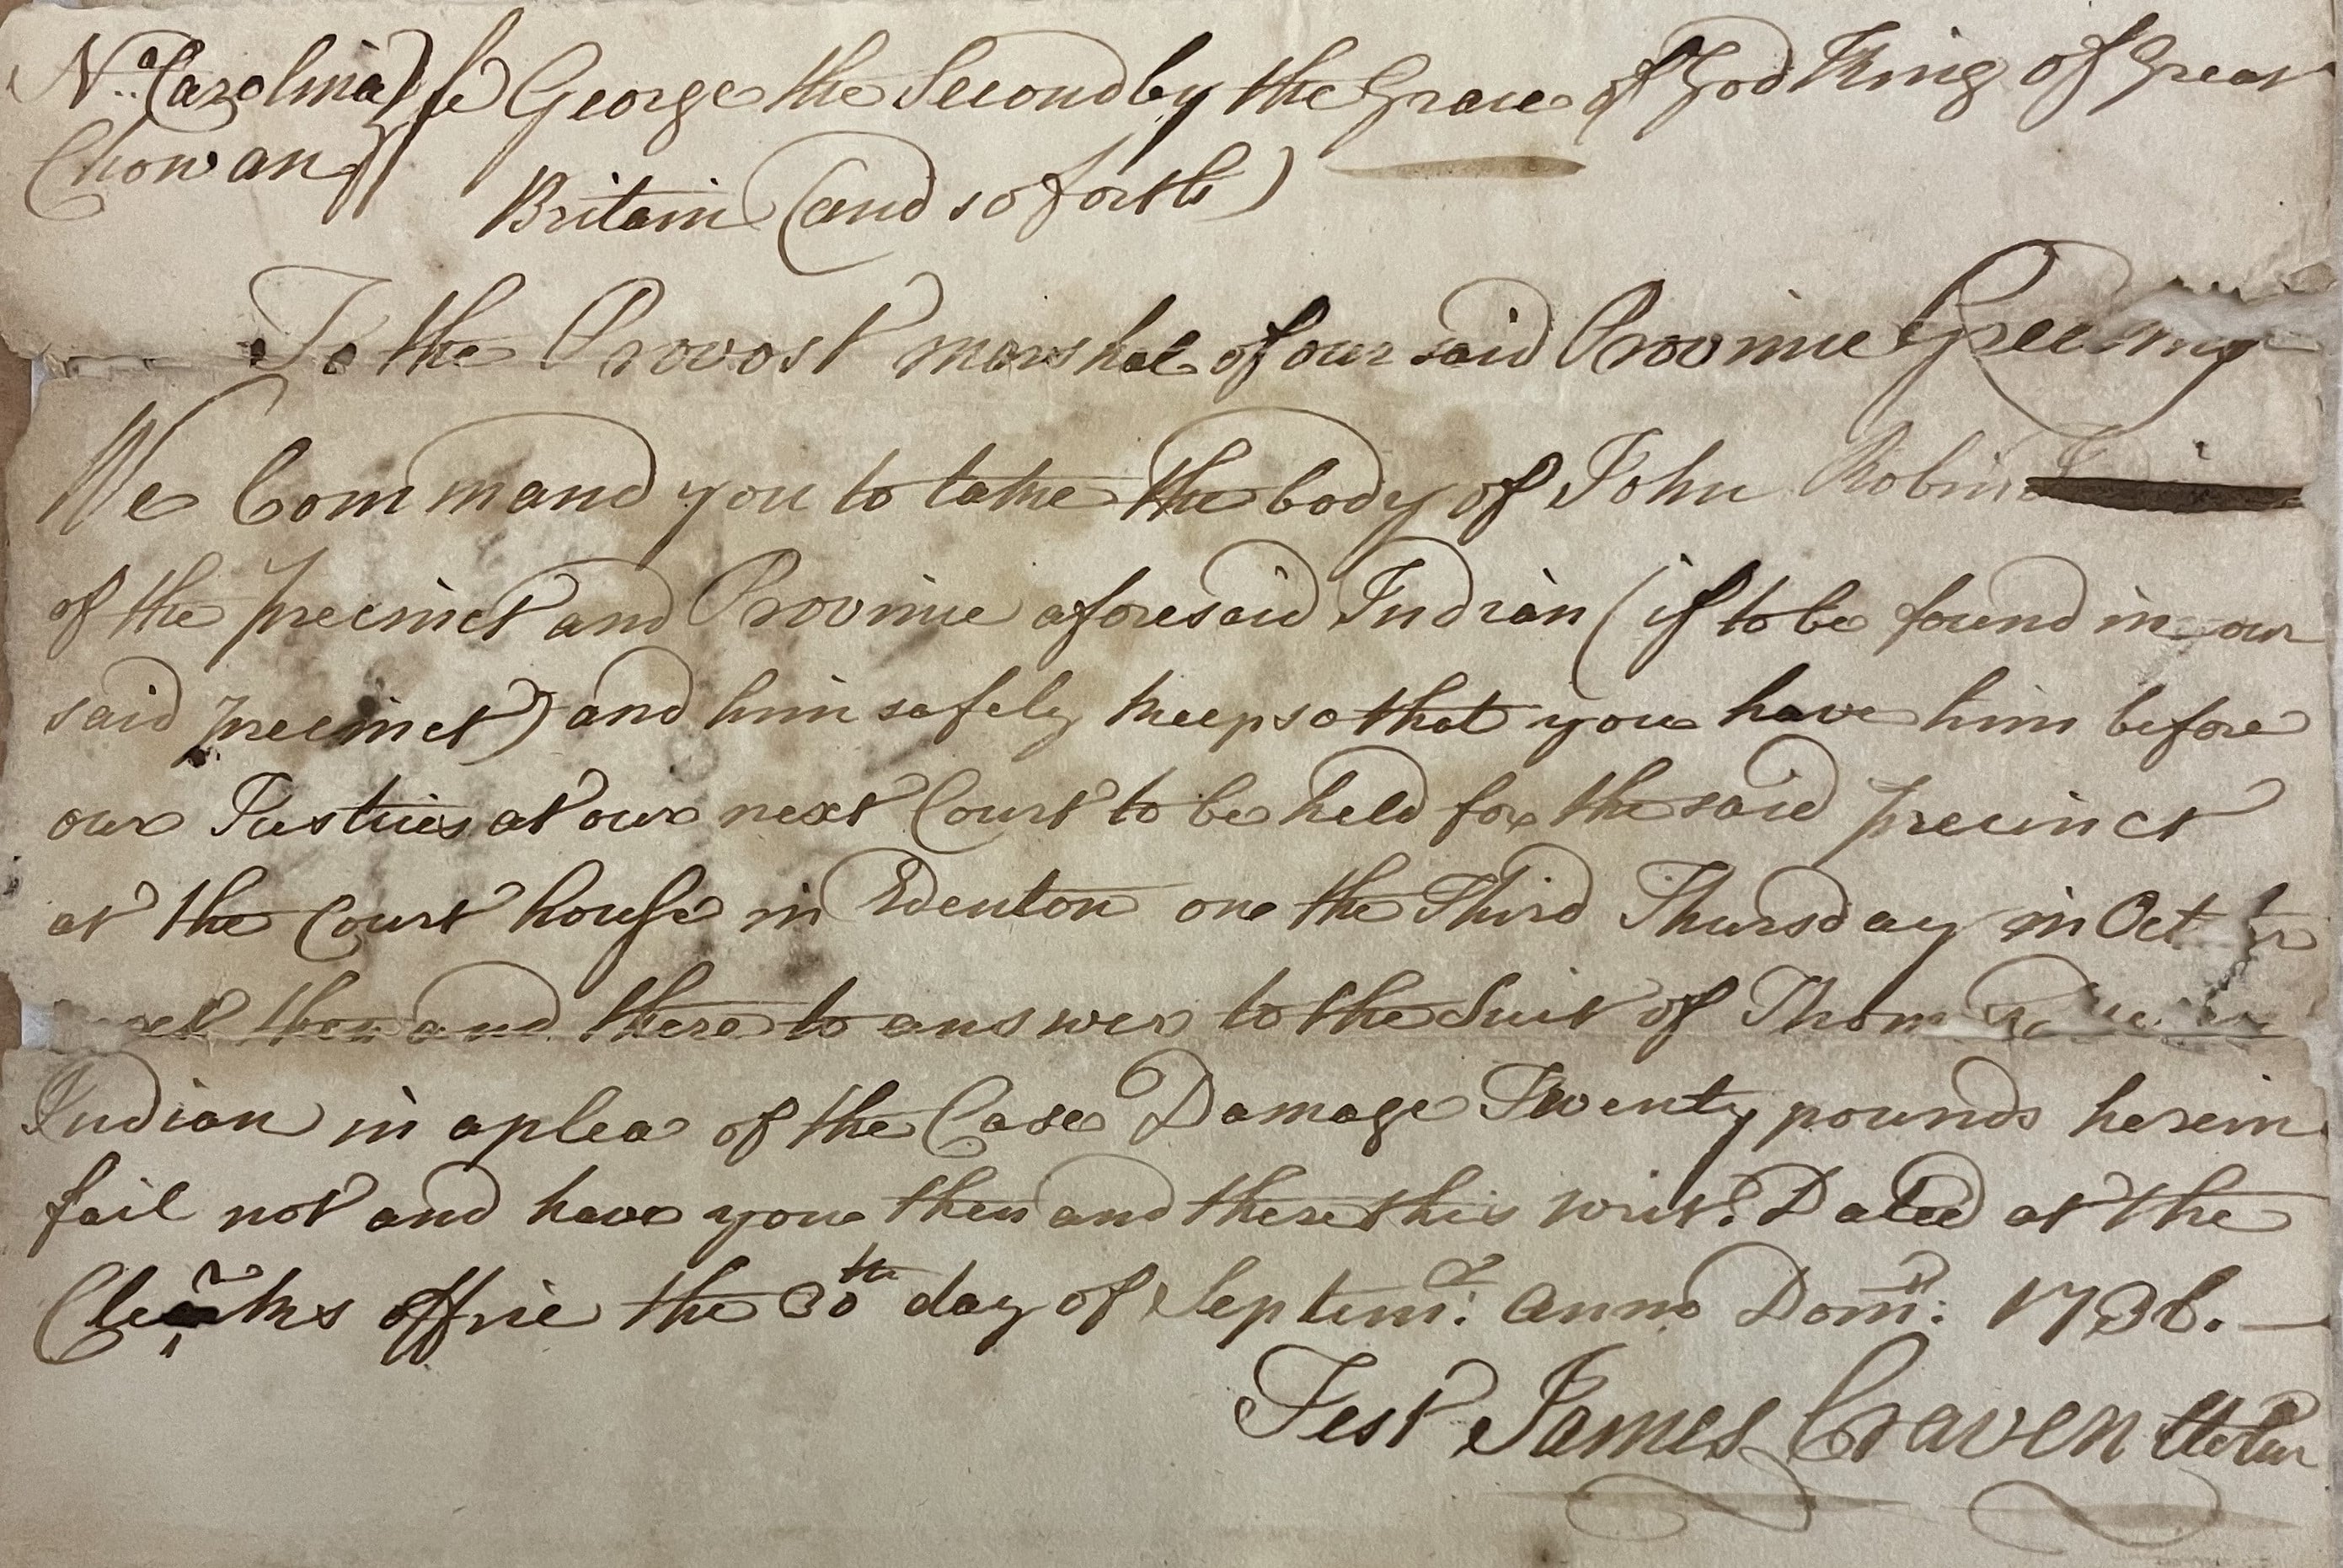 Warrant from James Craven to James Trotter for John Robins, 30 September 1736, page 1